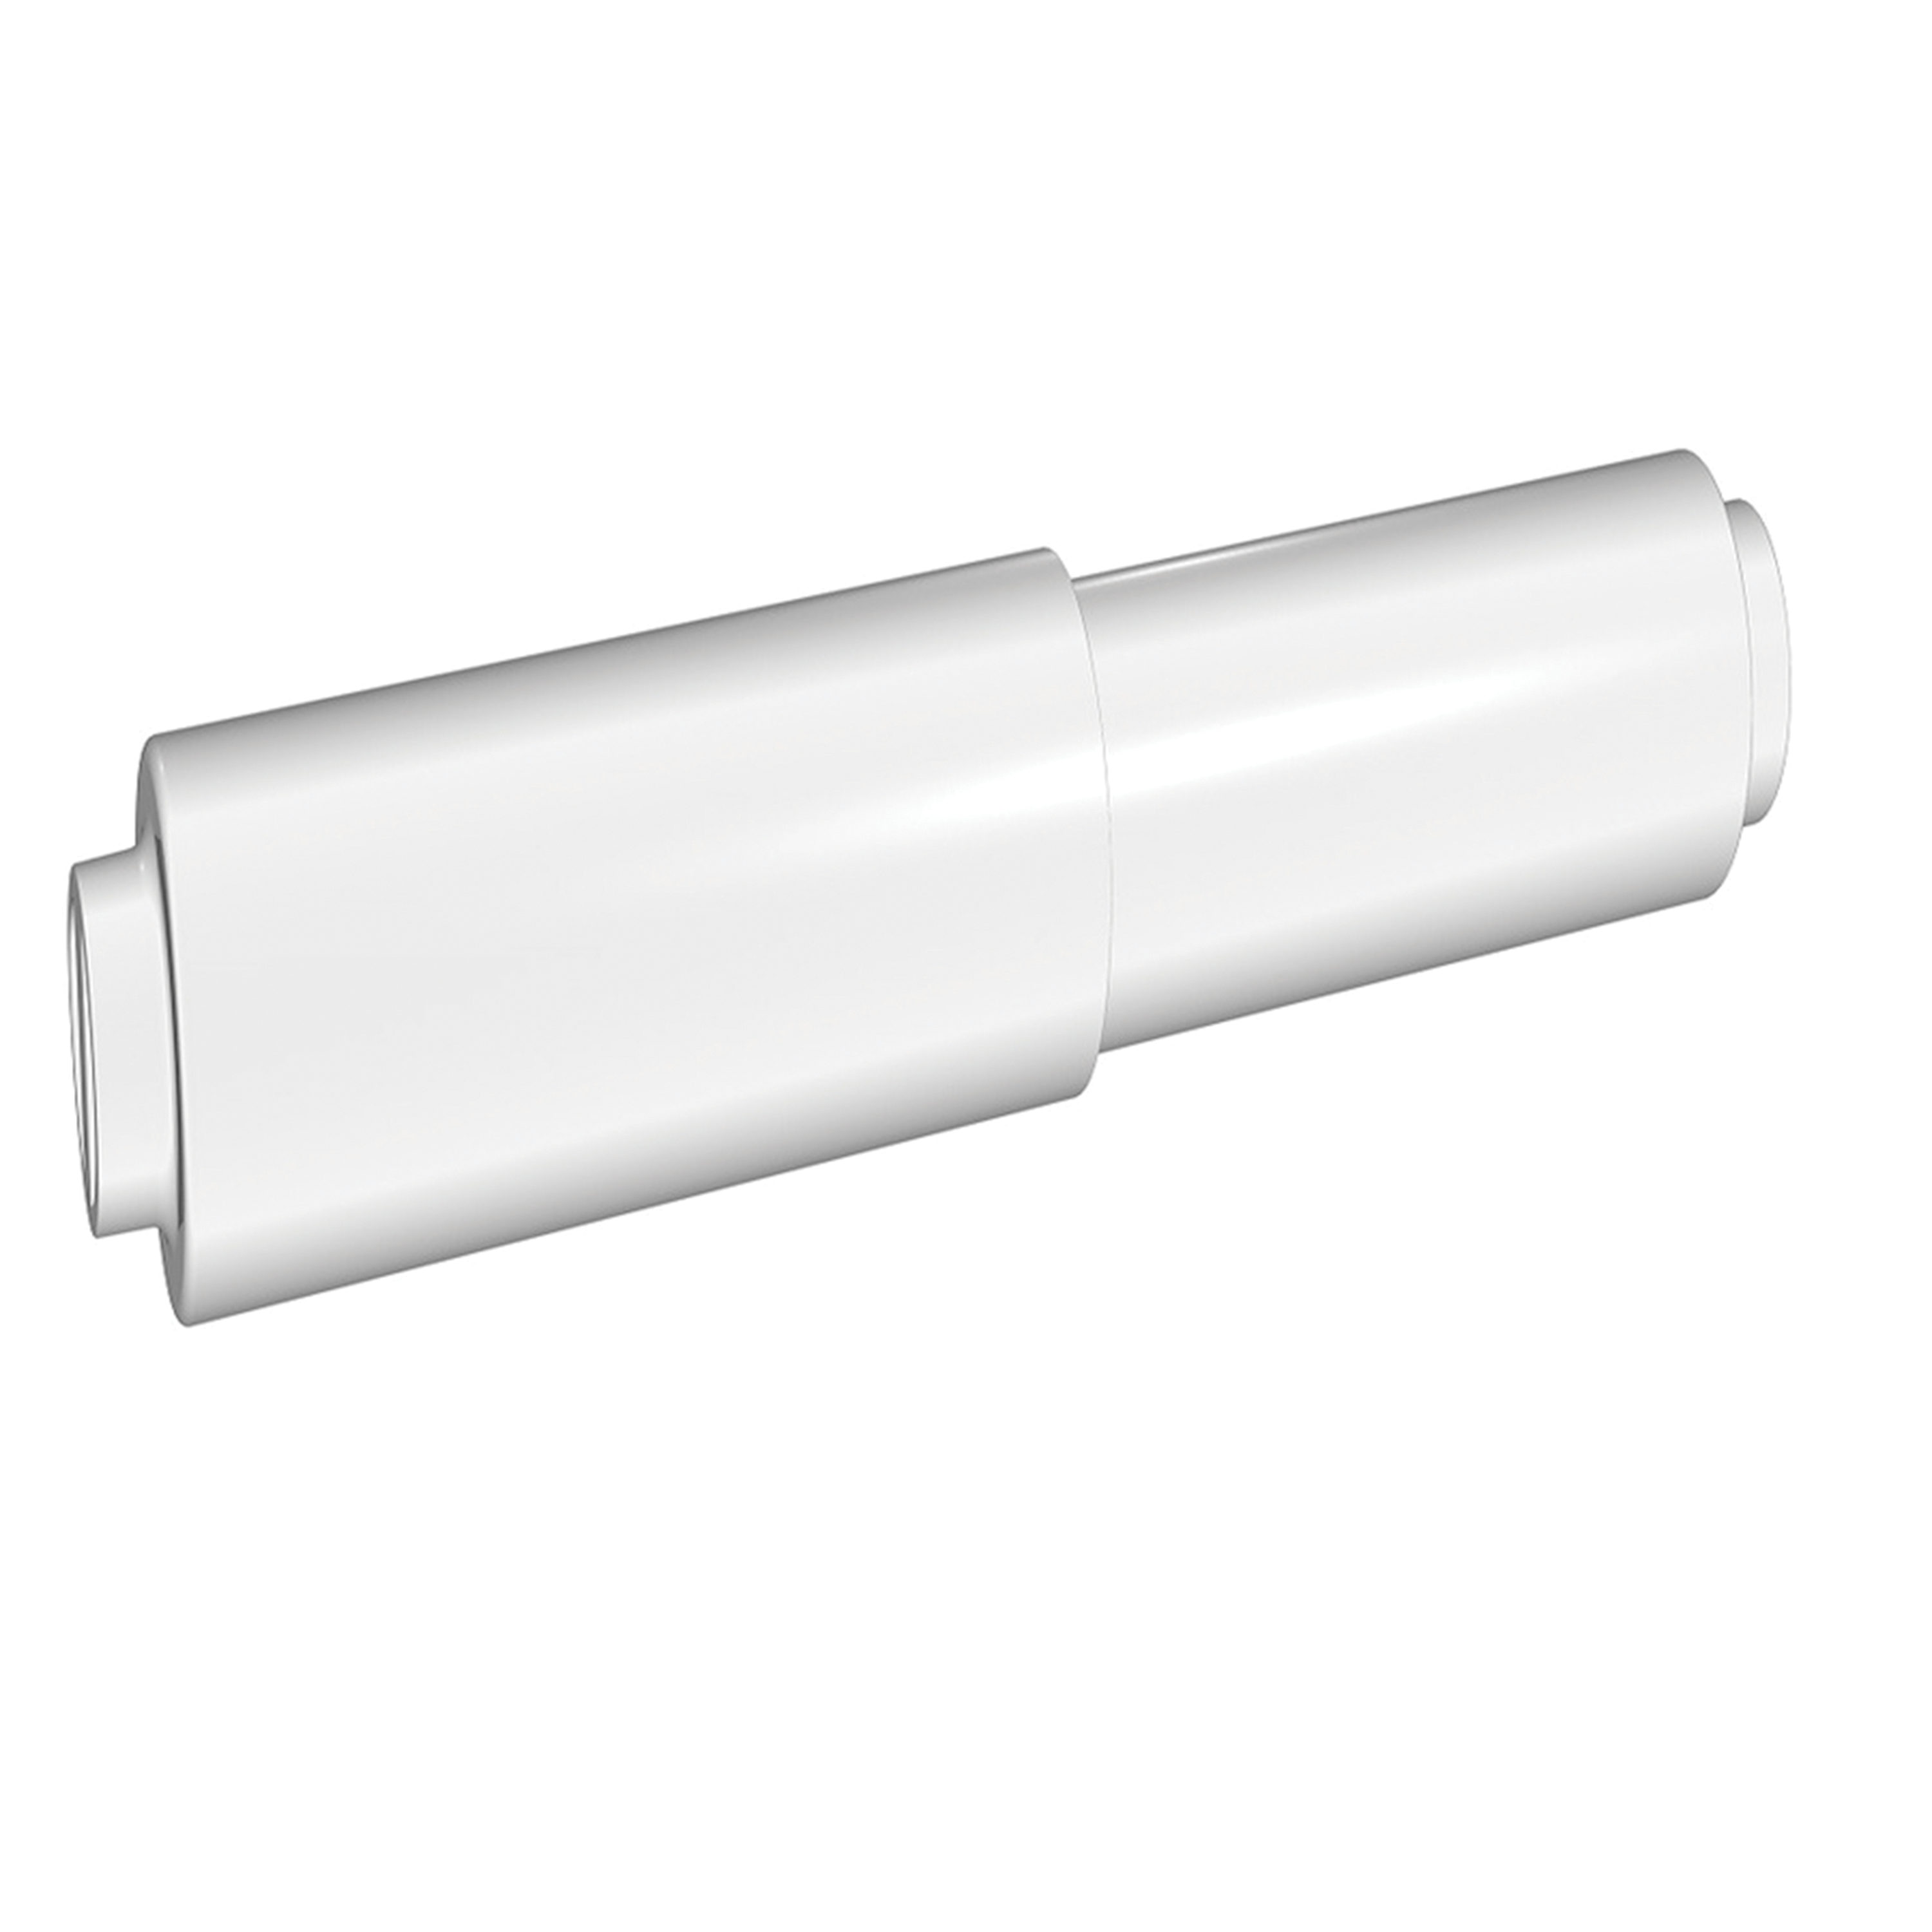 Homz Products/Bath Replacement Toilet Paper Roller 